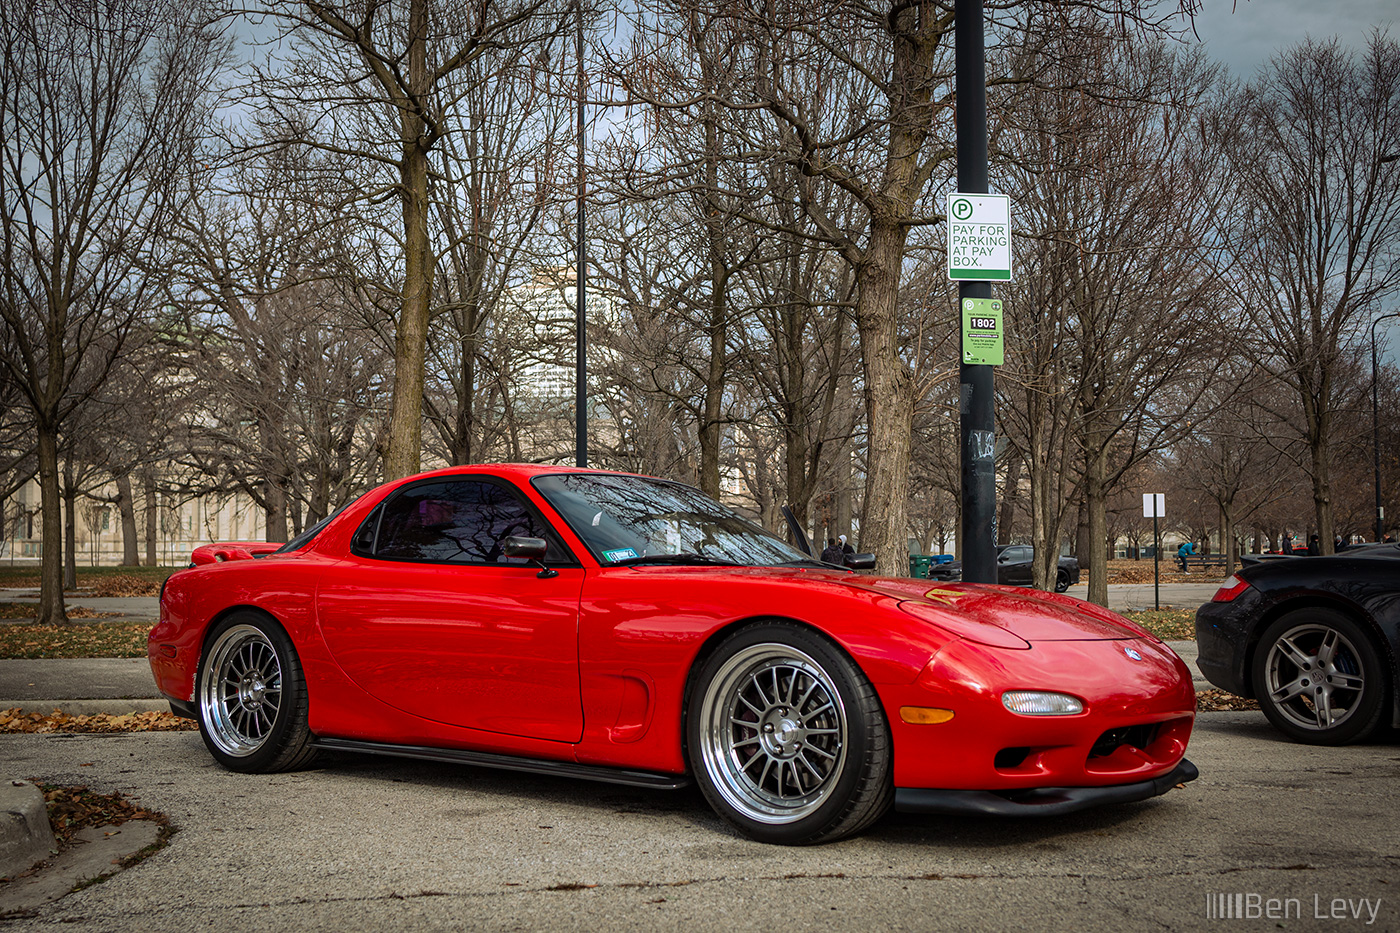 Red Mazda RX-7 at Thanksgiving Car Meet in Chicago